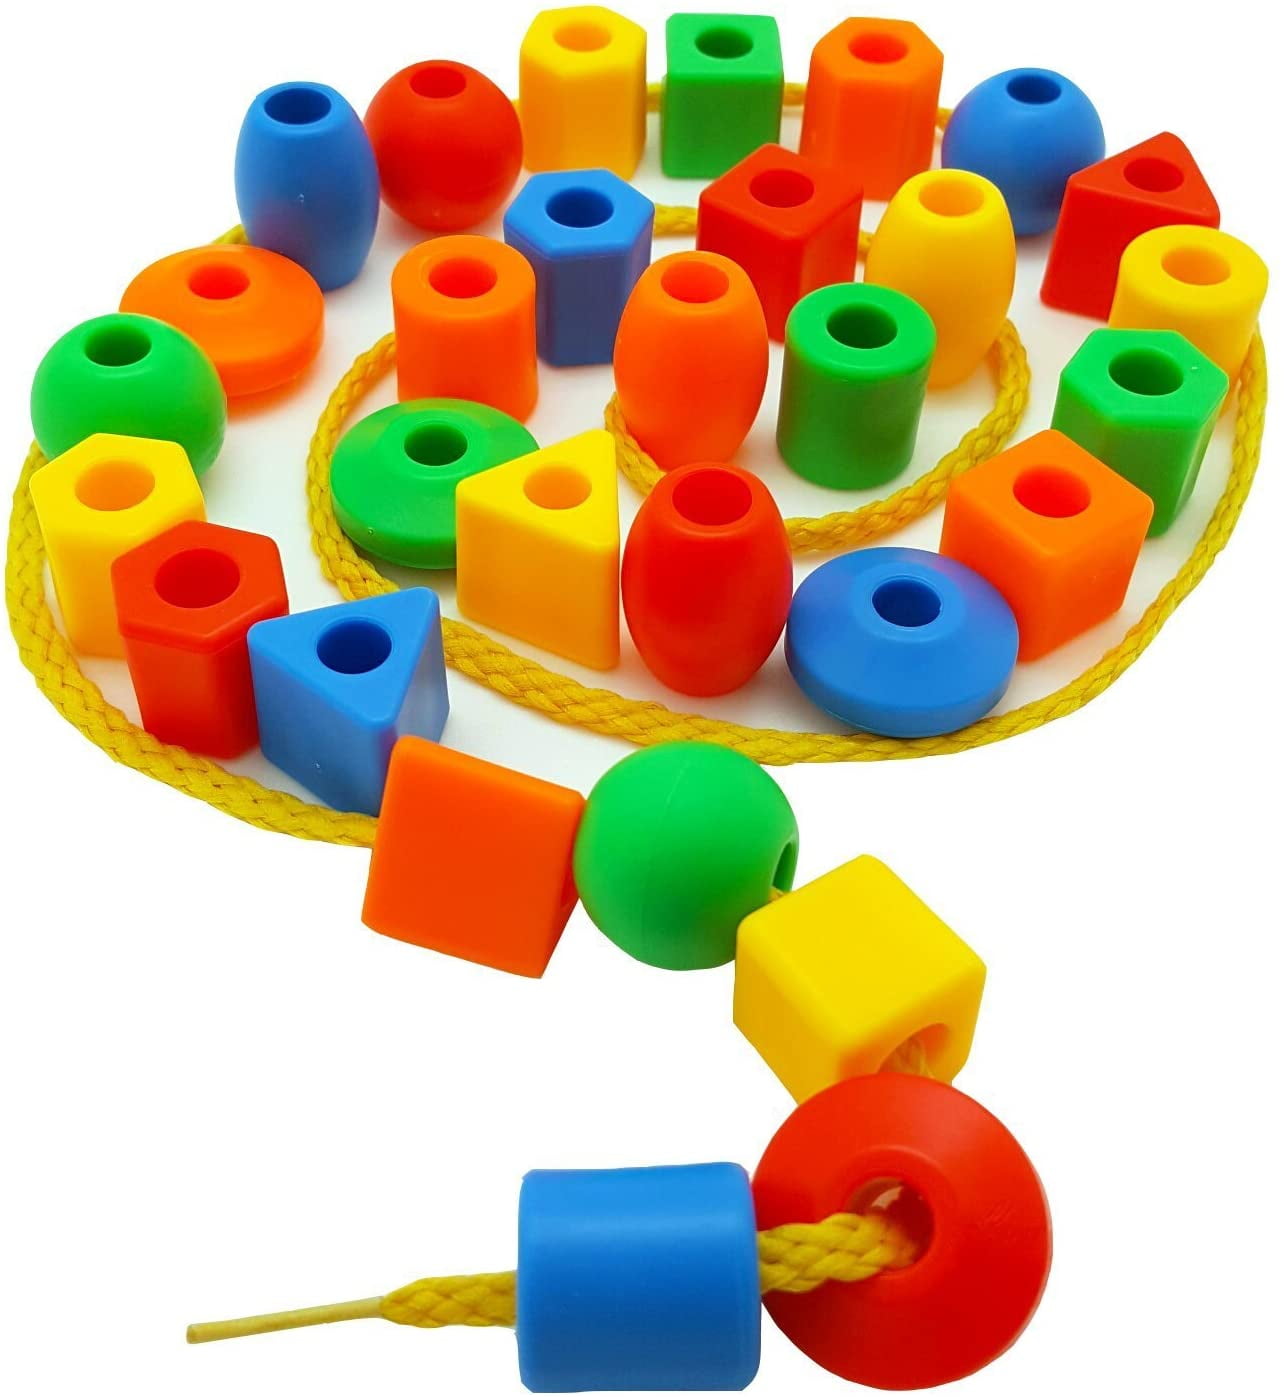 Colorful Wooden Number Caterpillar Toy Beads DIY Lacing Beads Set For Toddlers-Montessori Preschool Kids